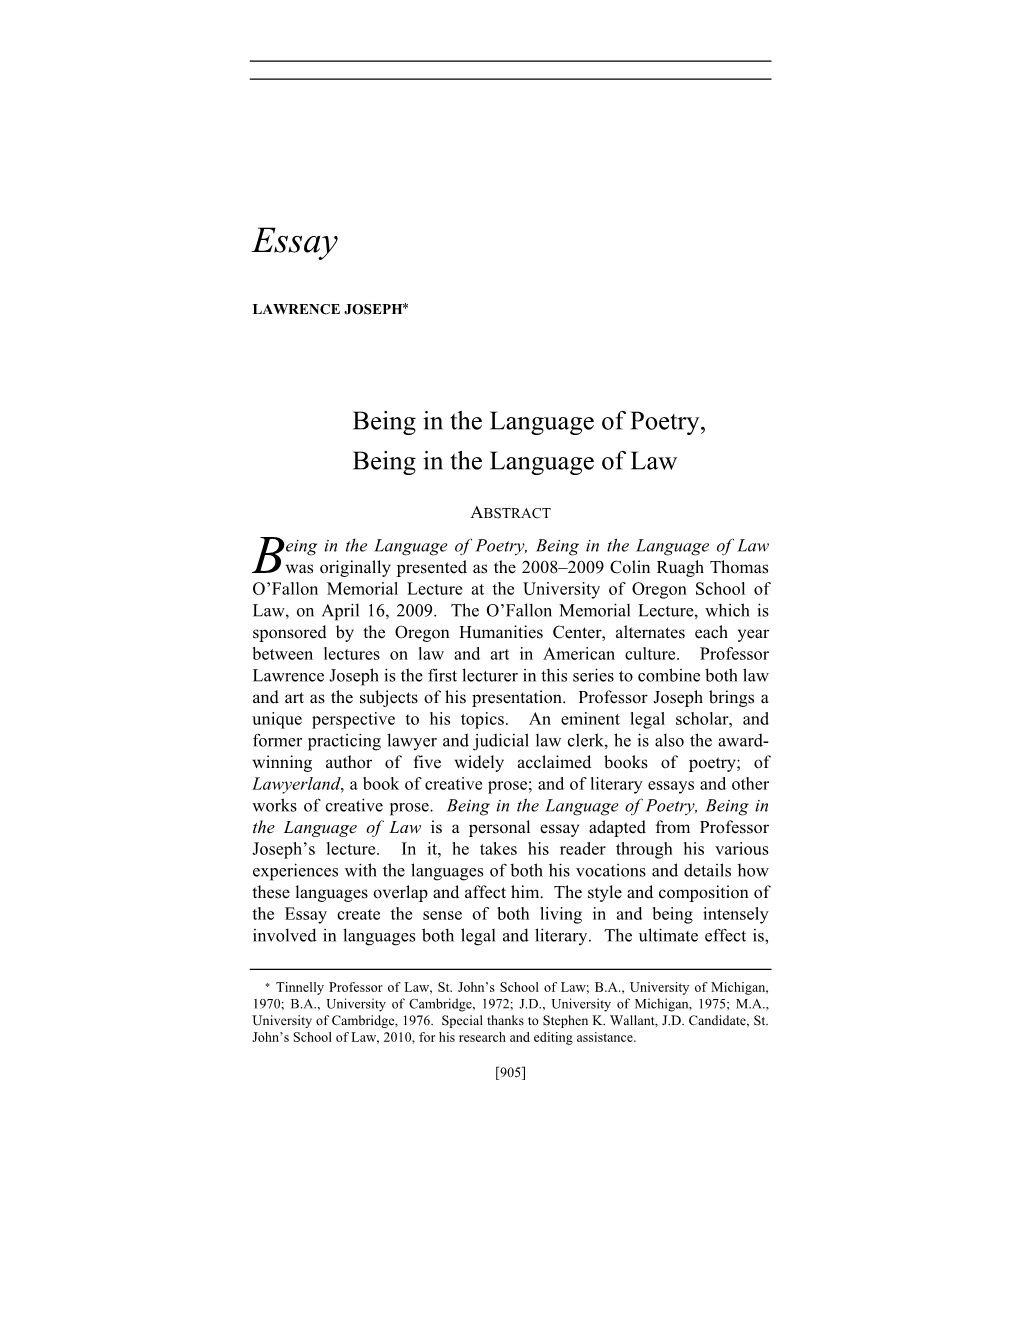 Being in the Language of Poetry, Being in the Language of Law